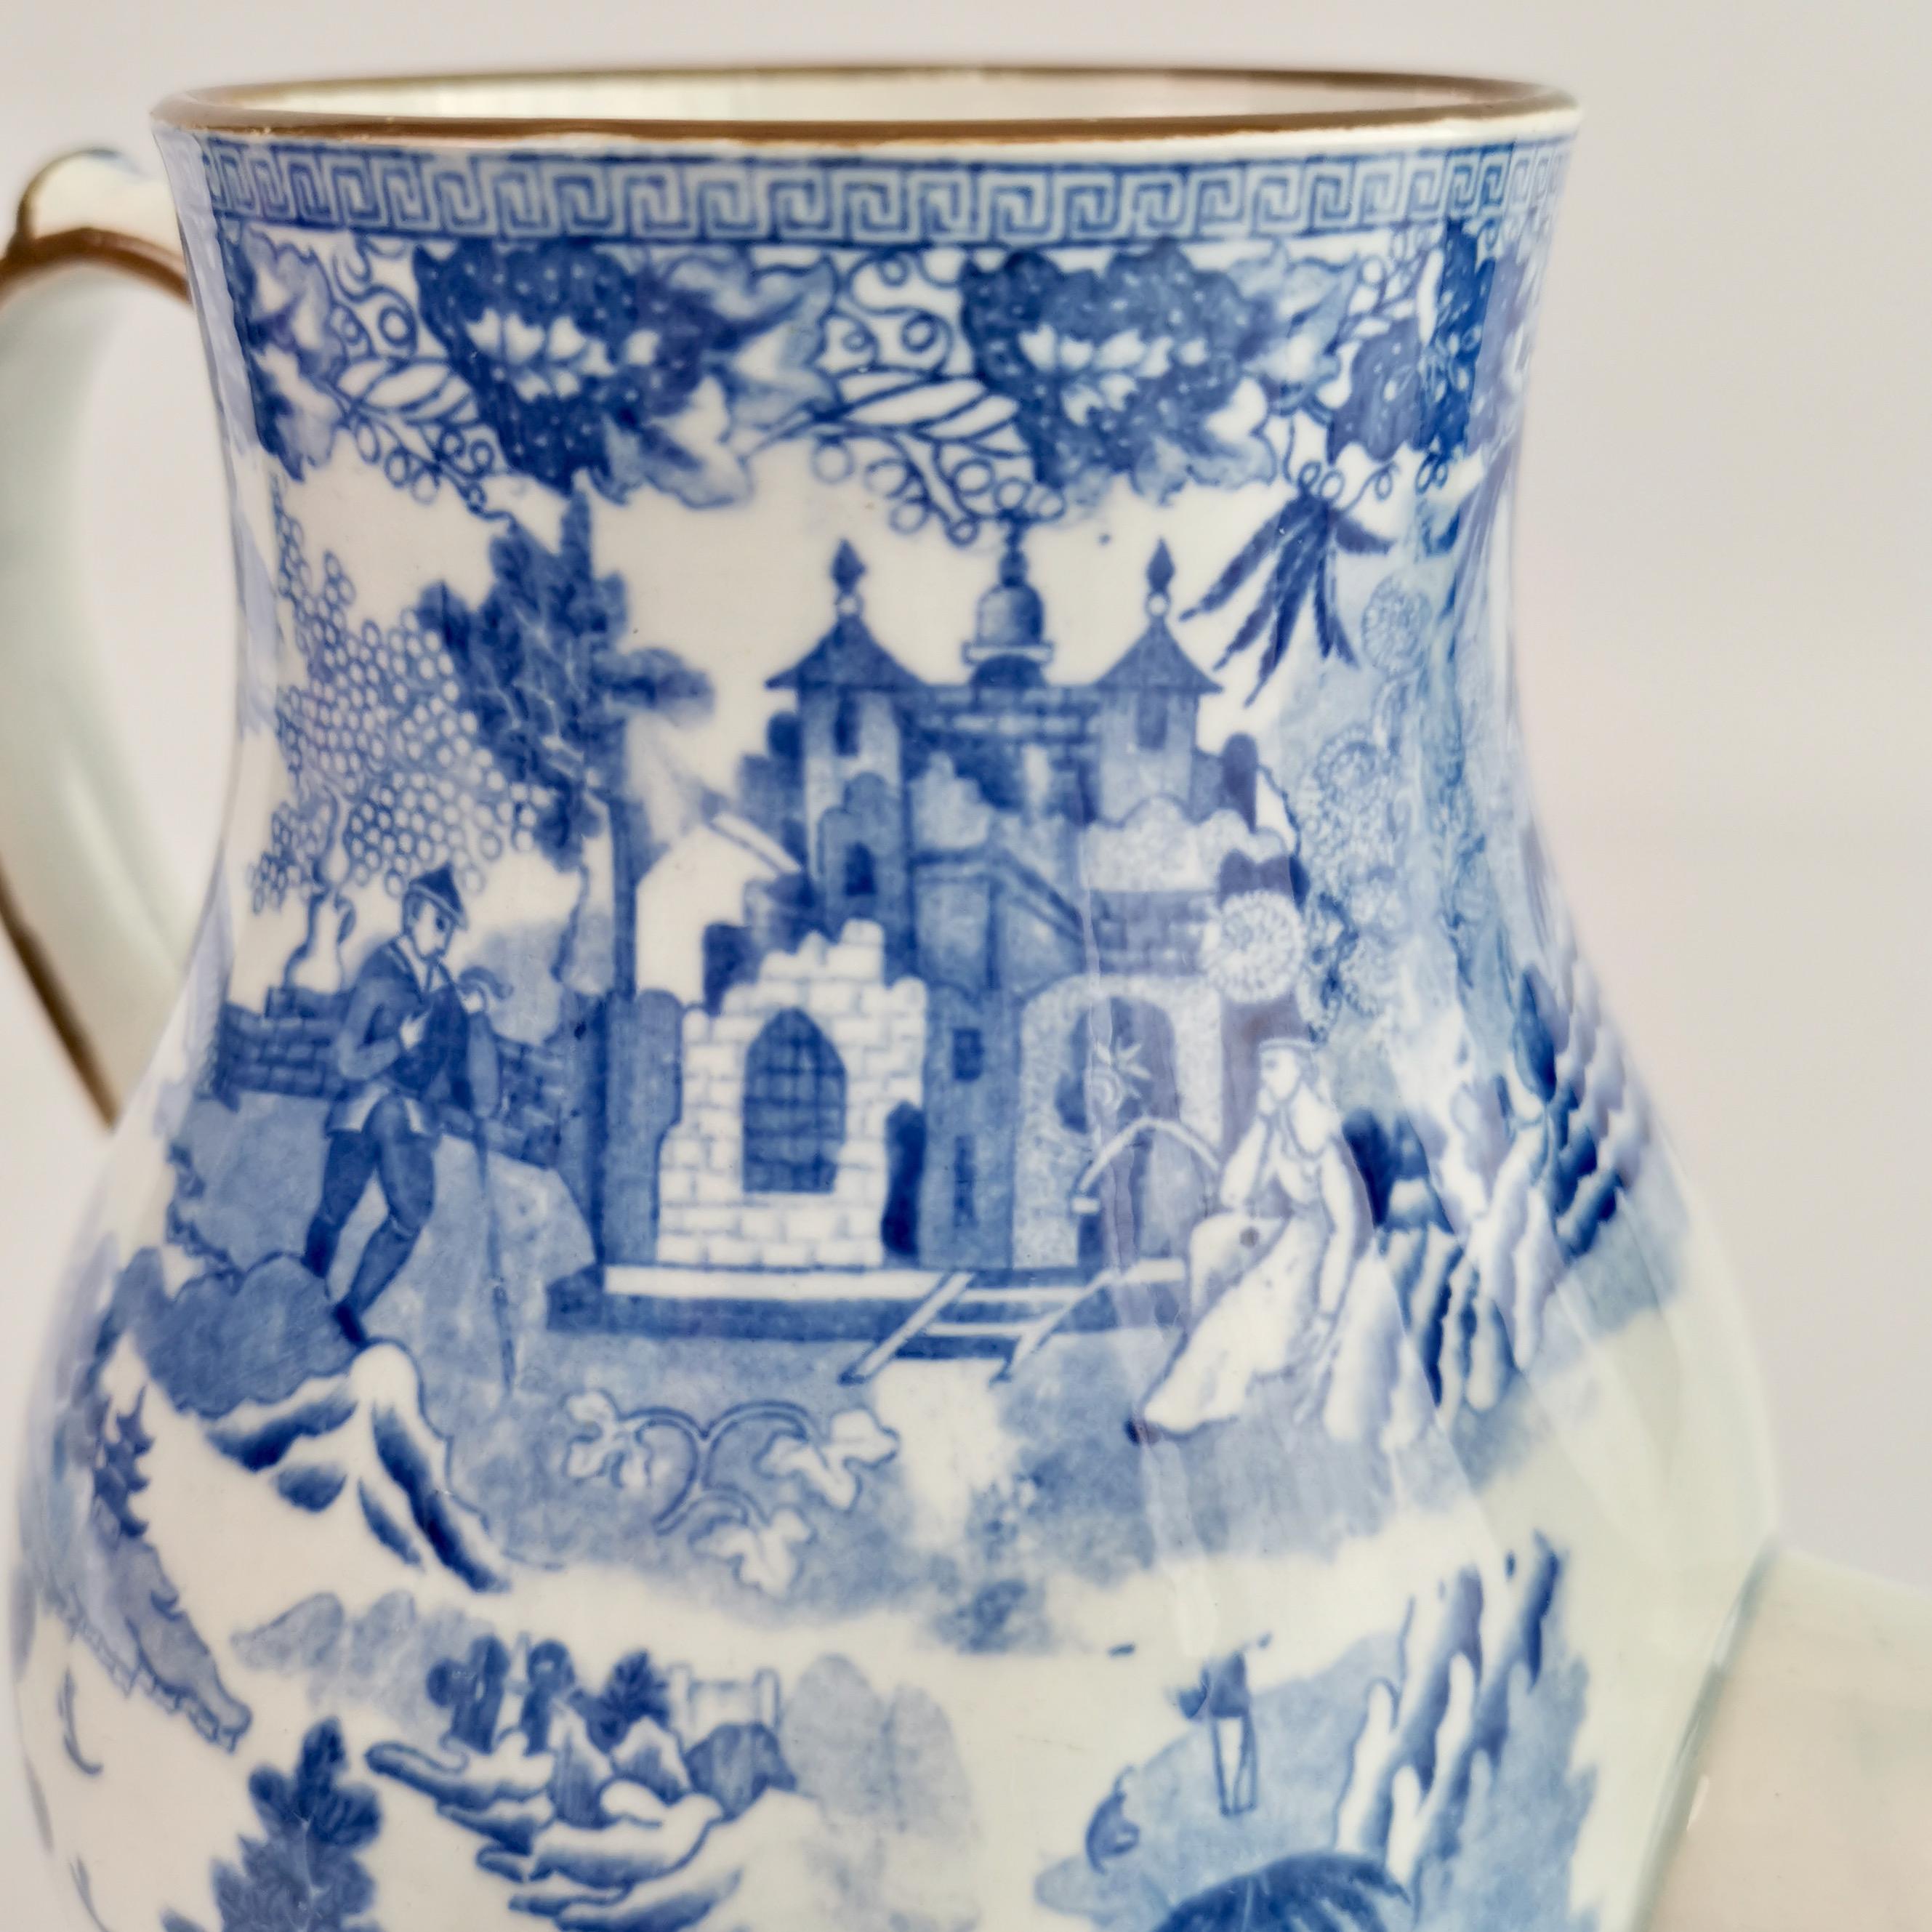 Porcelain Rathbone Pearlware Coffee Pot, Pagoda Pattern Blue and White, ca 1815